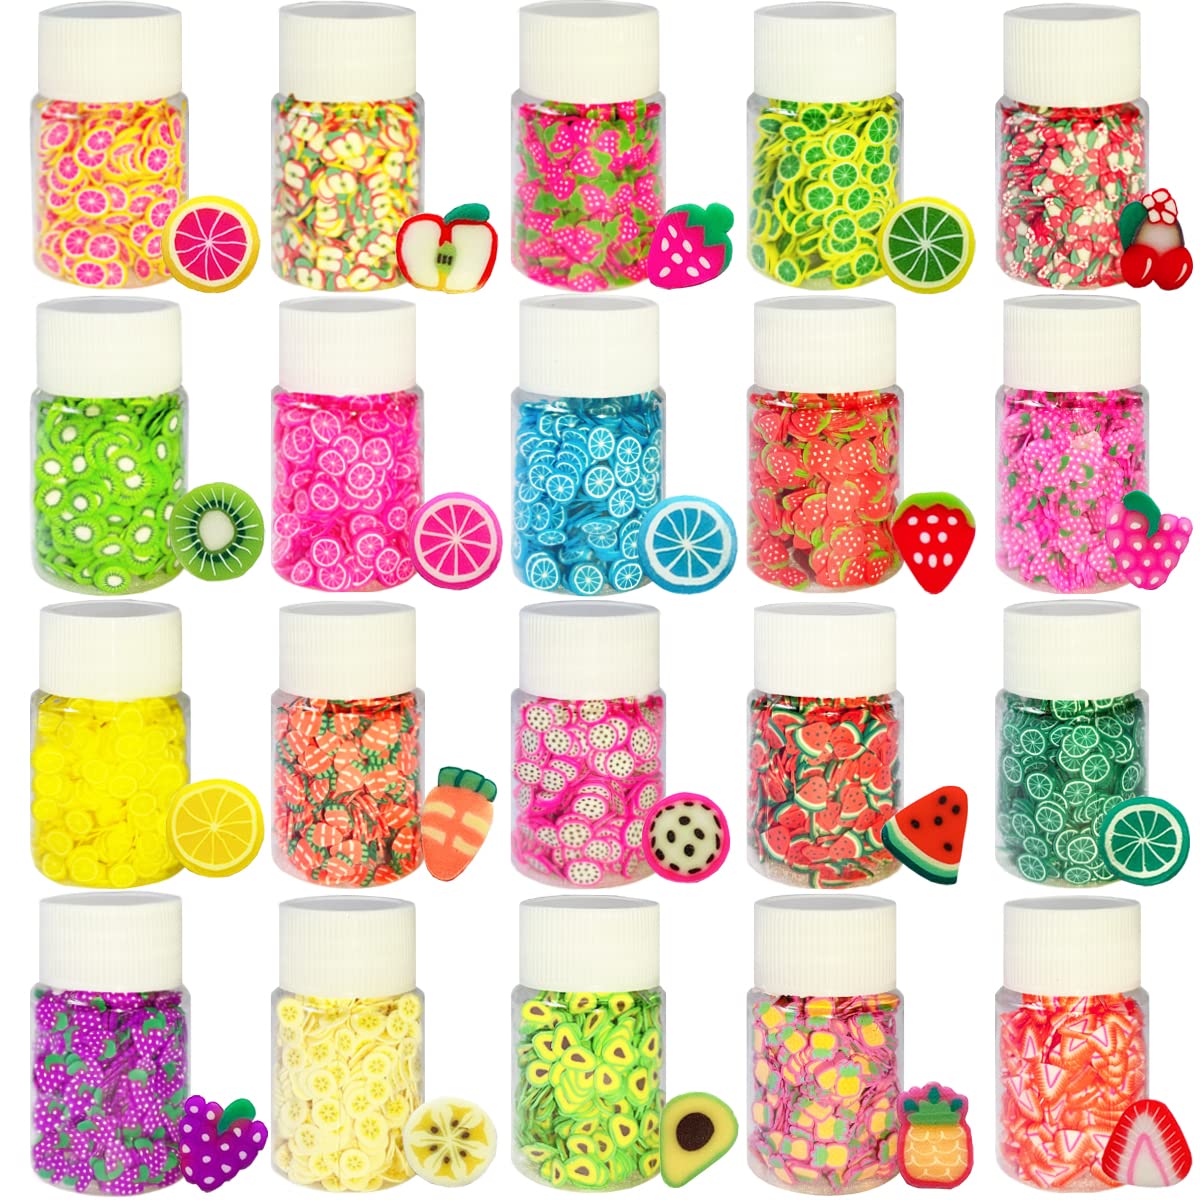 NAIL ANGEL 18bags Different Design Mix Bag Polymer Clay Slices Fruit Cake  Flower Etc Shapes Mix 10051